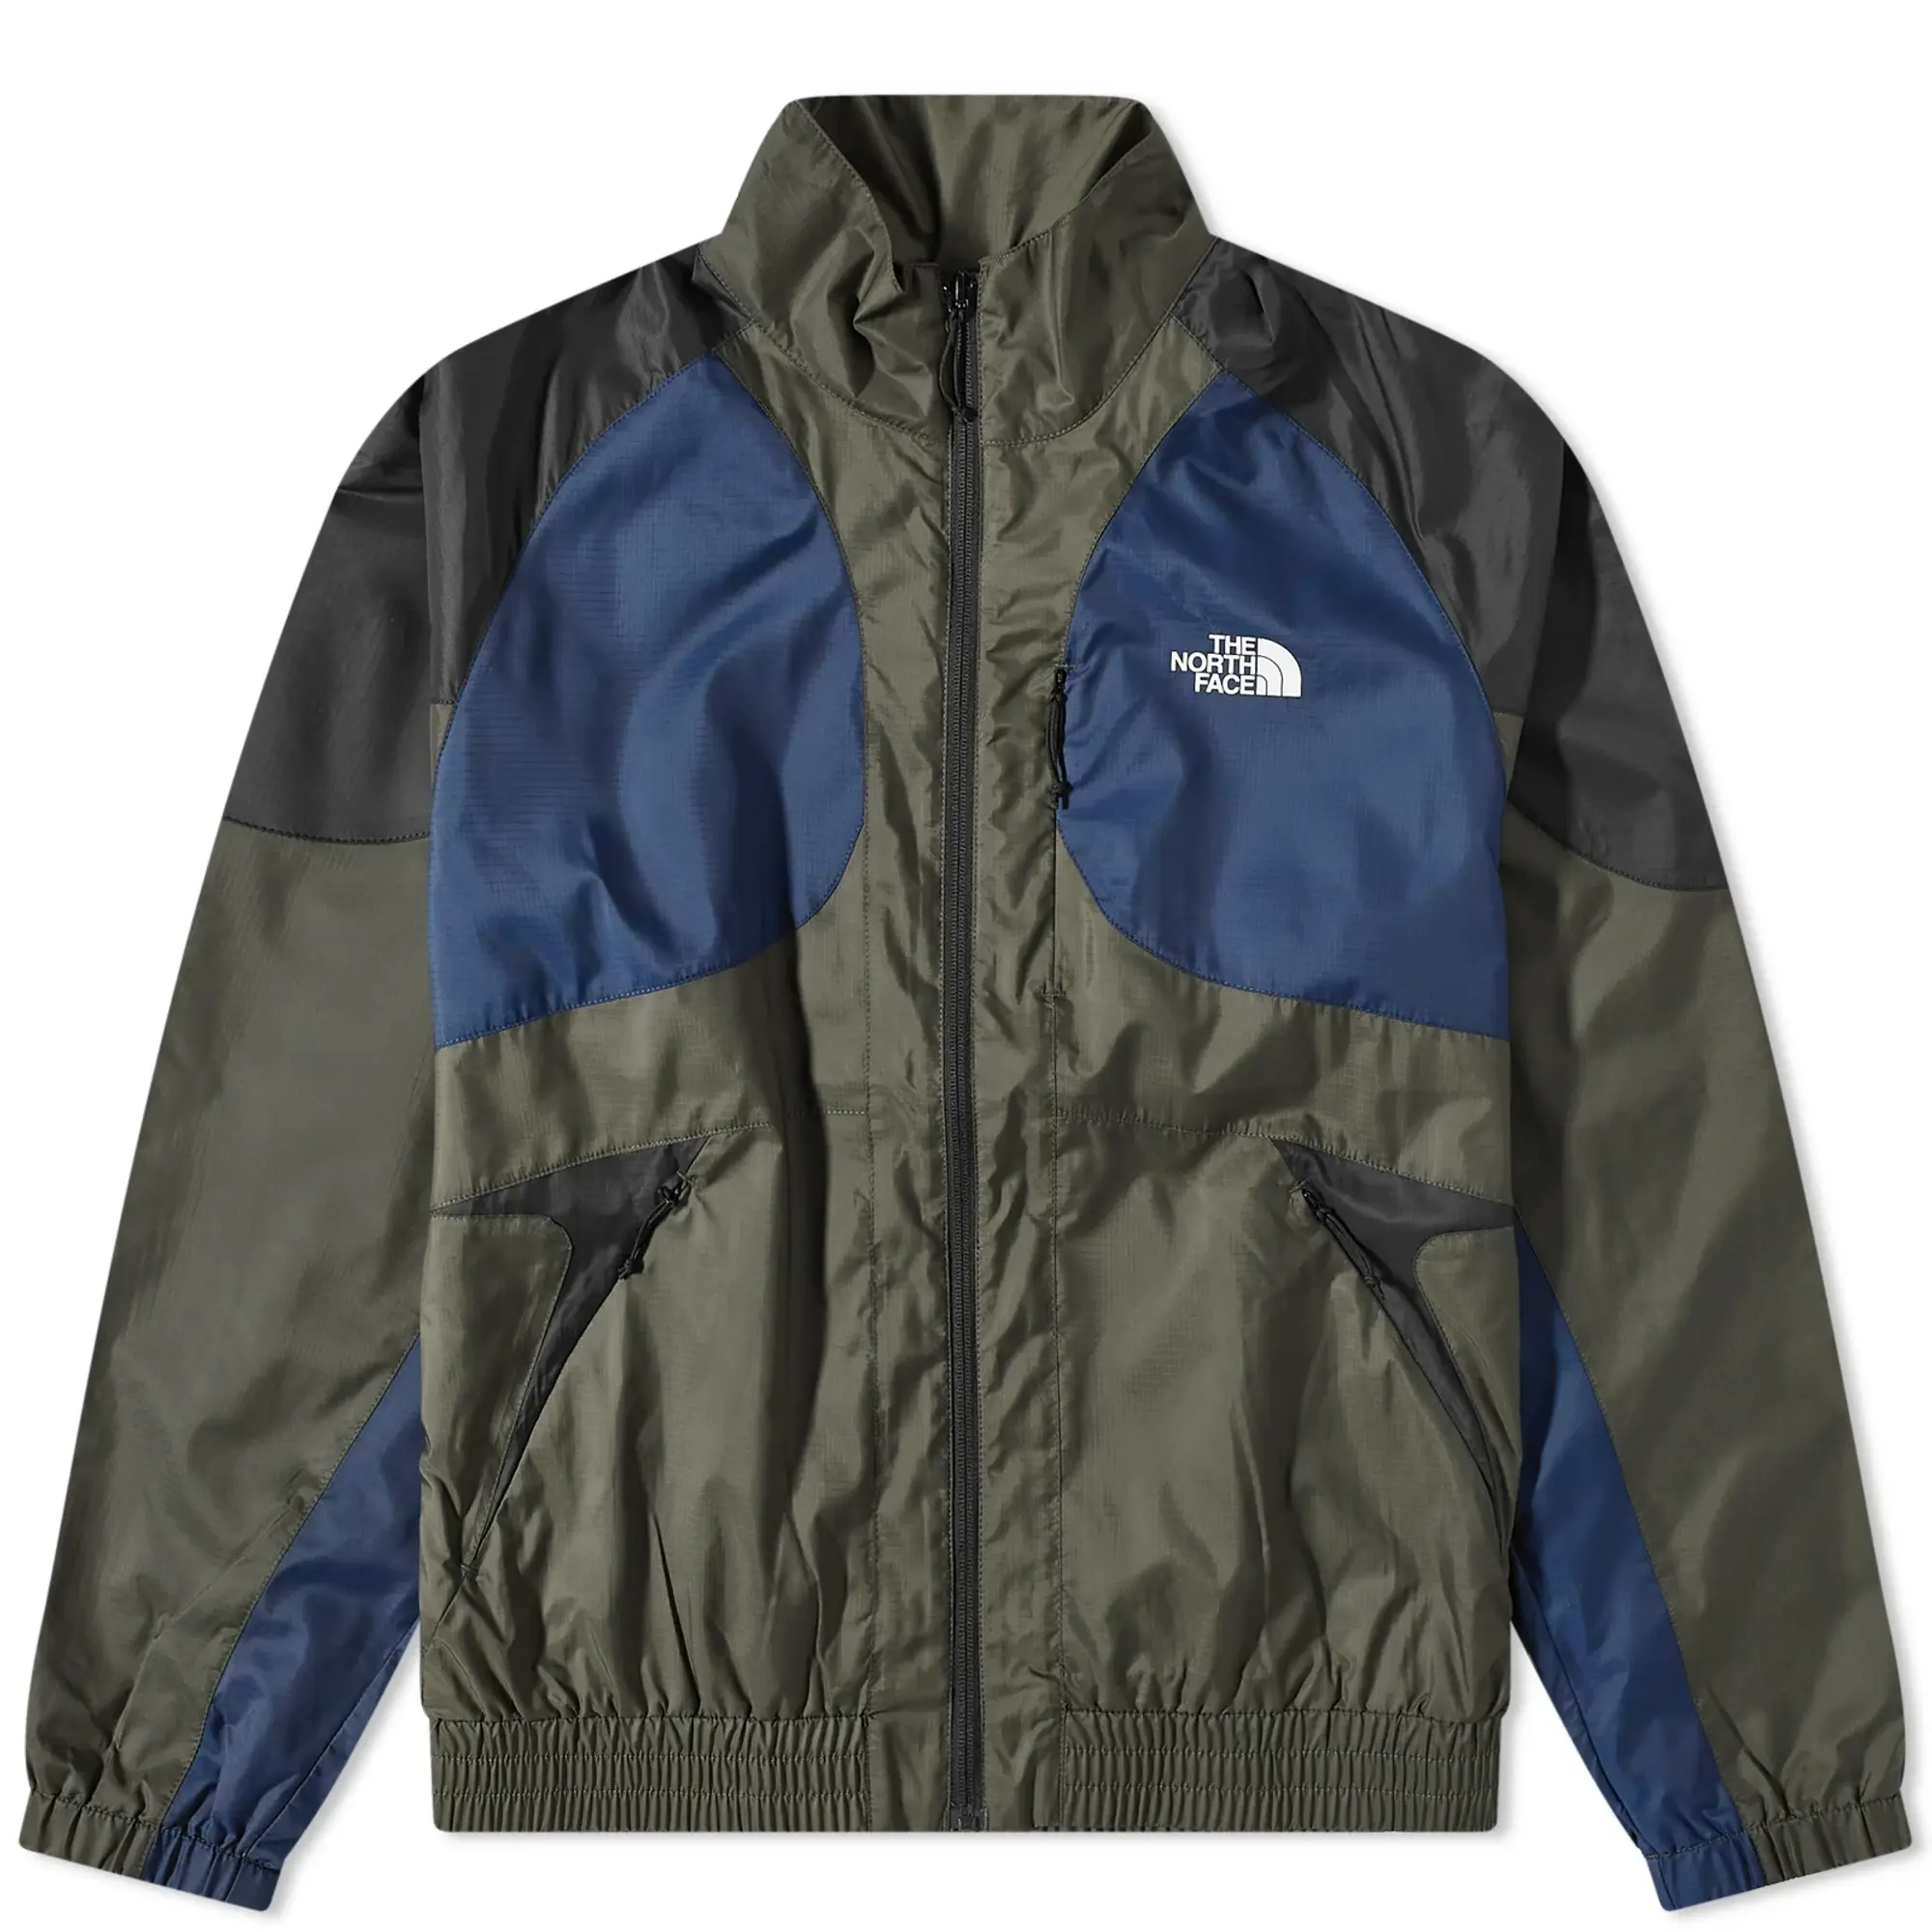 The North Face Men's TNF X Jacket New Taupe Green/Summit Navy/Black